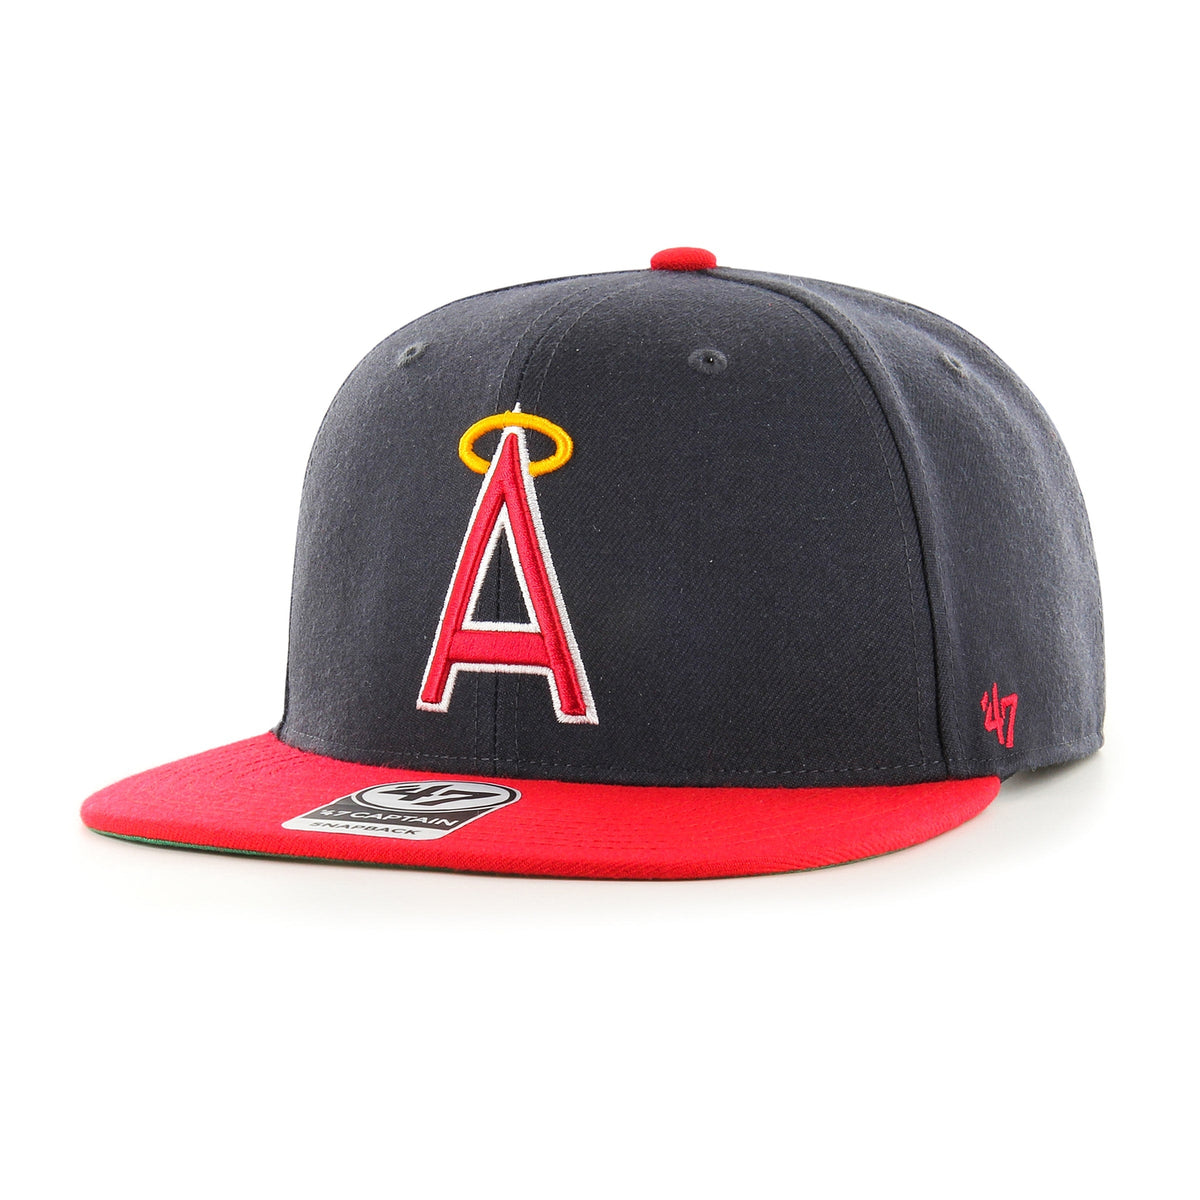 https://www.thewatchoutlets.shop/wp-content/uploads/1691/11/find-your-47-brand-sureshot-captain-los-angeles-angels-snapback-logo-patch-hat-navy-red-47-brand-from-many-different-products_1.jpg